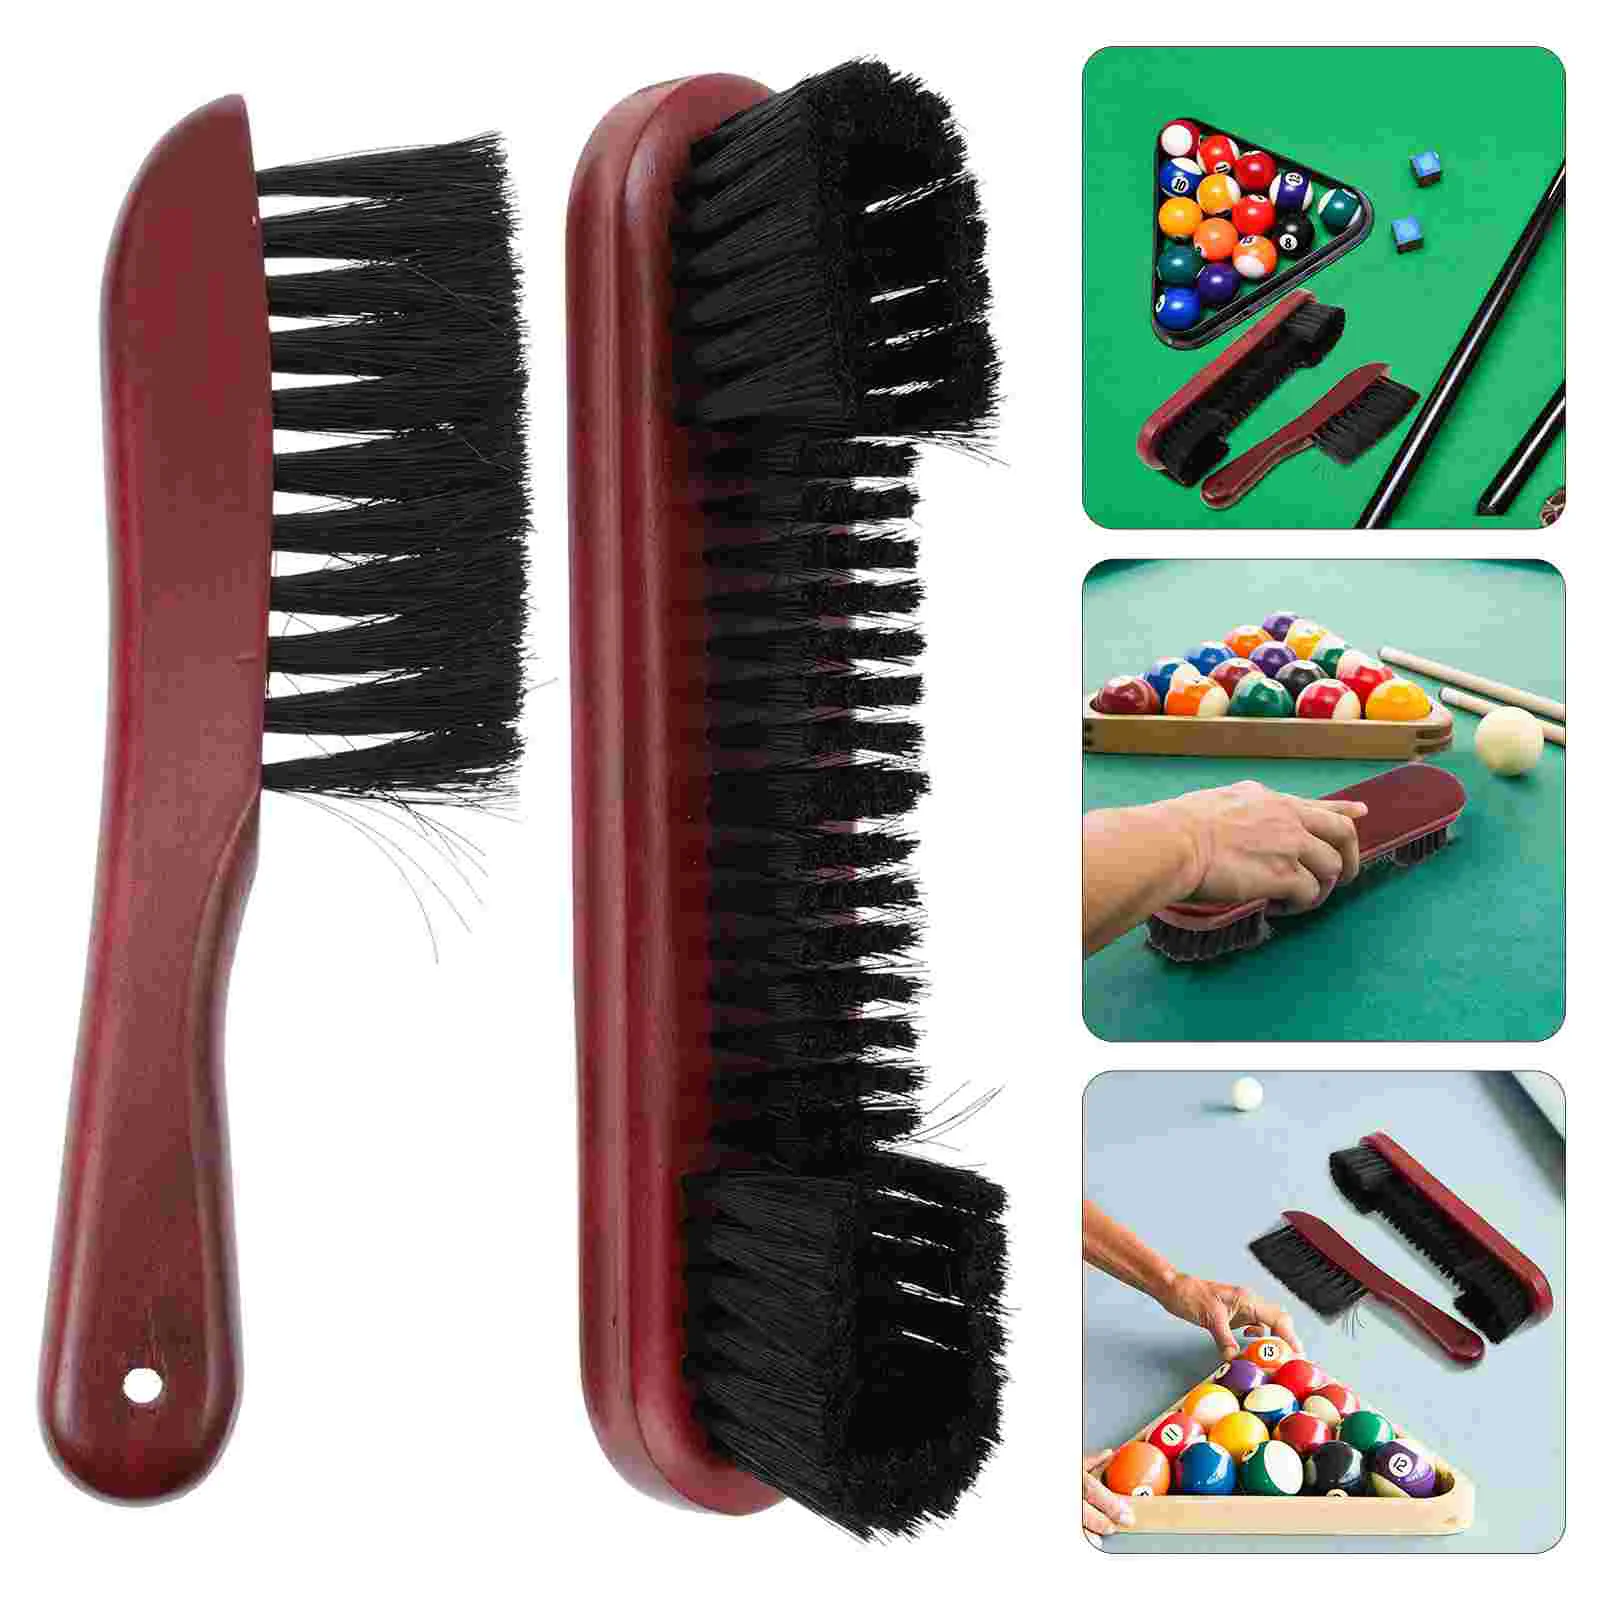 

Table Brush Pool Cleaning Billiards Snookerrail Versatile Sweeper Portable Wooden Brushes Tool